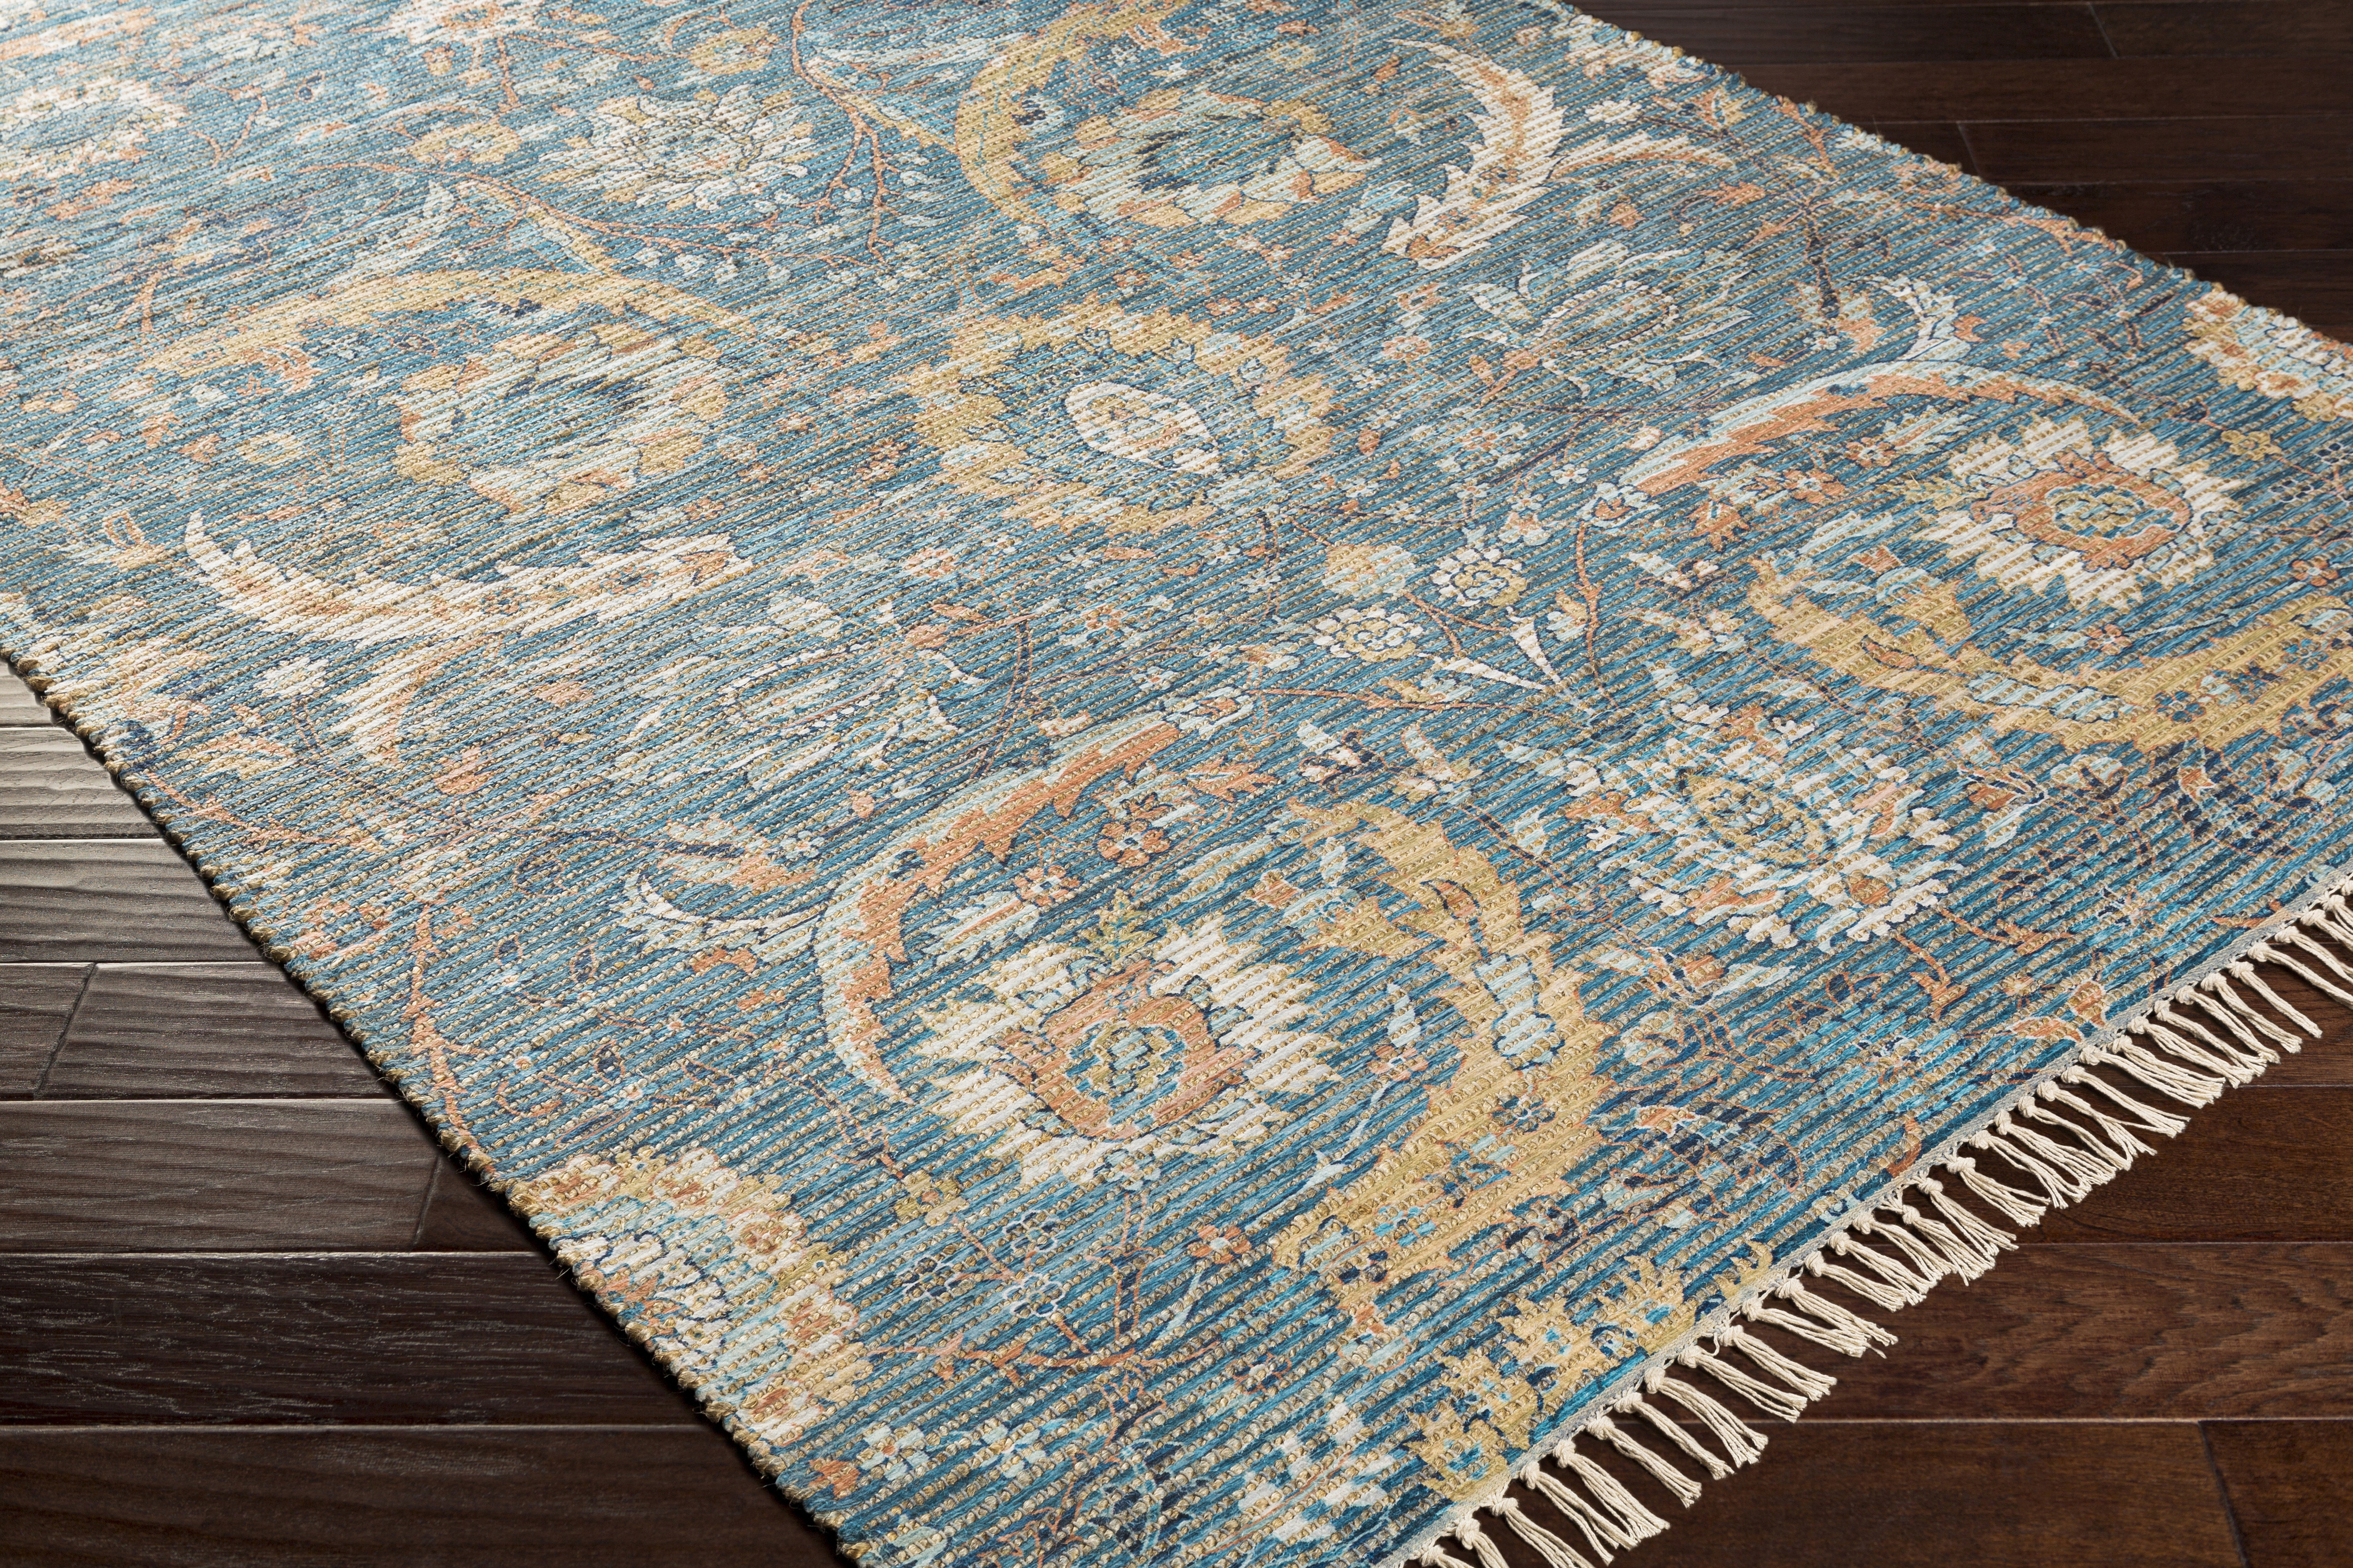 Coventry Rug, 2'6" x 4' - Image 3